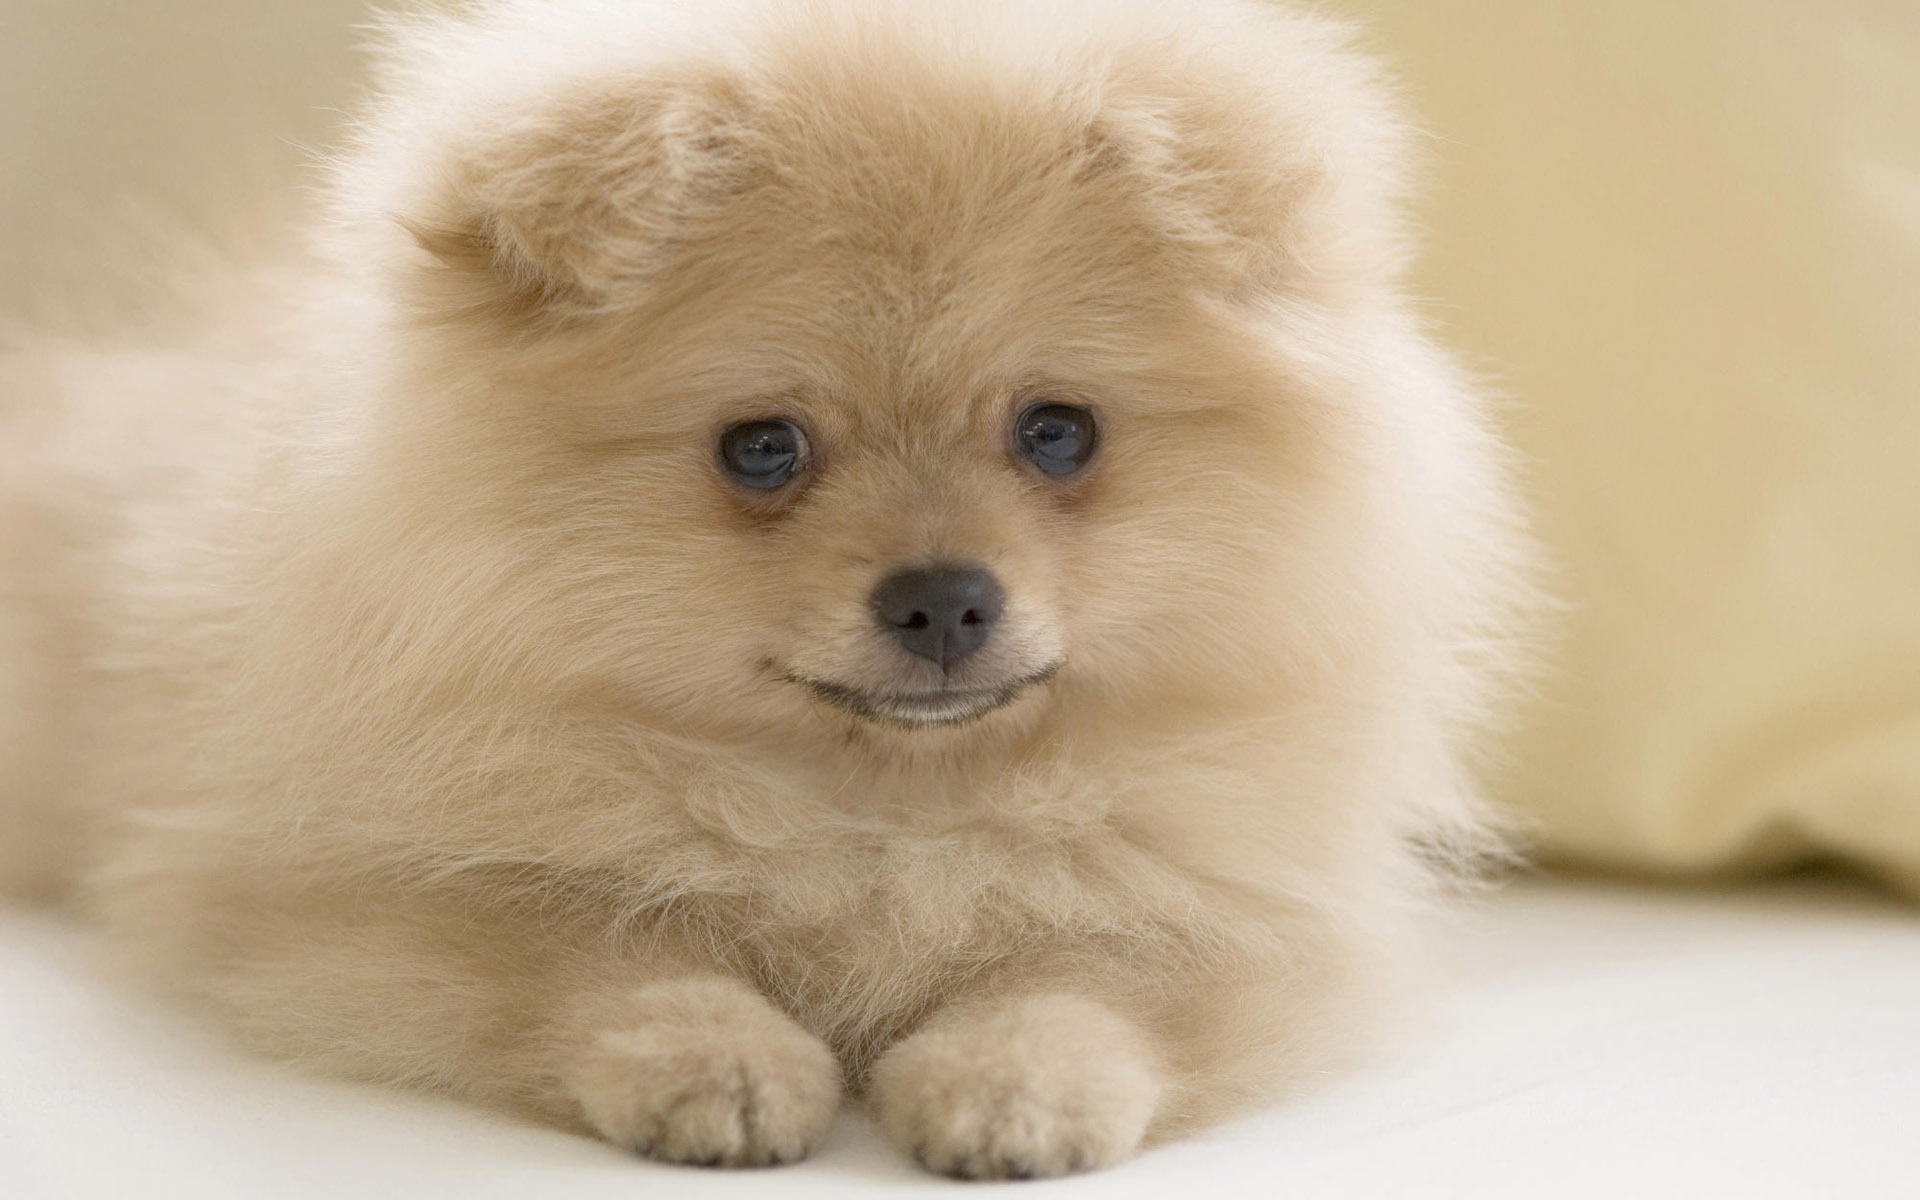 Puppy Photo HD wallpapers (10) #12 - 1920x1200